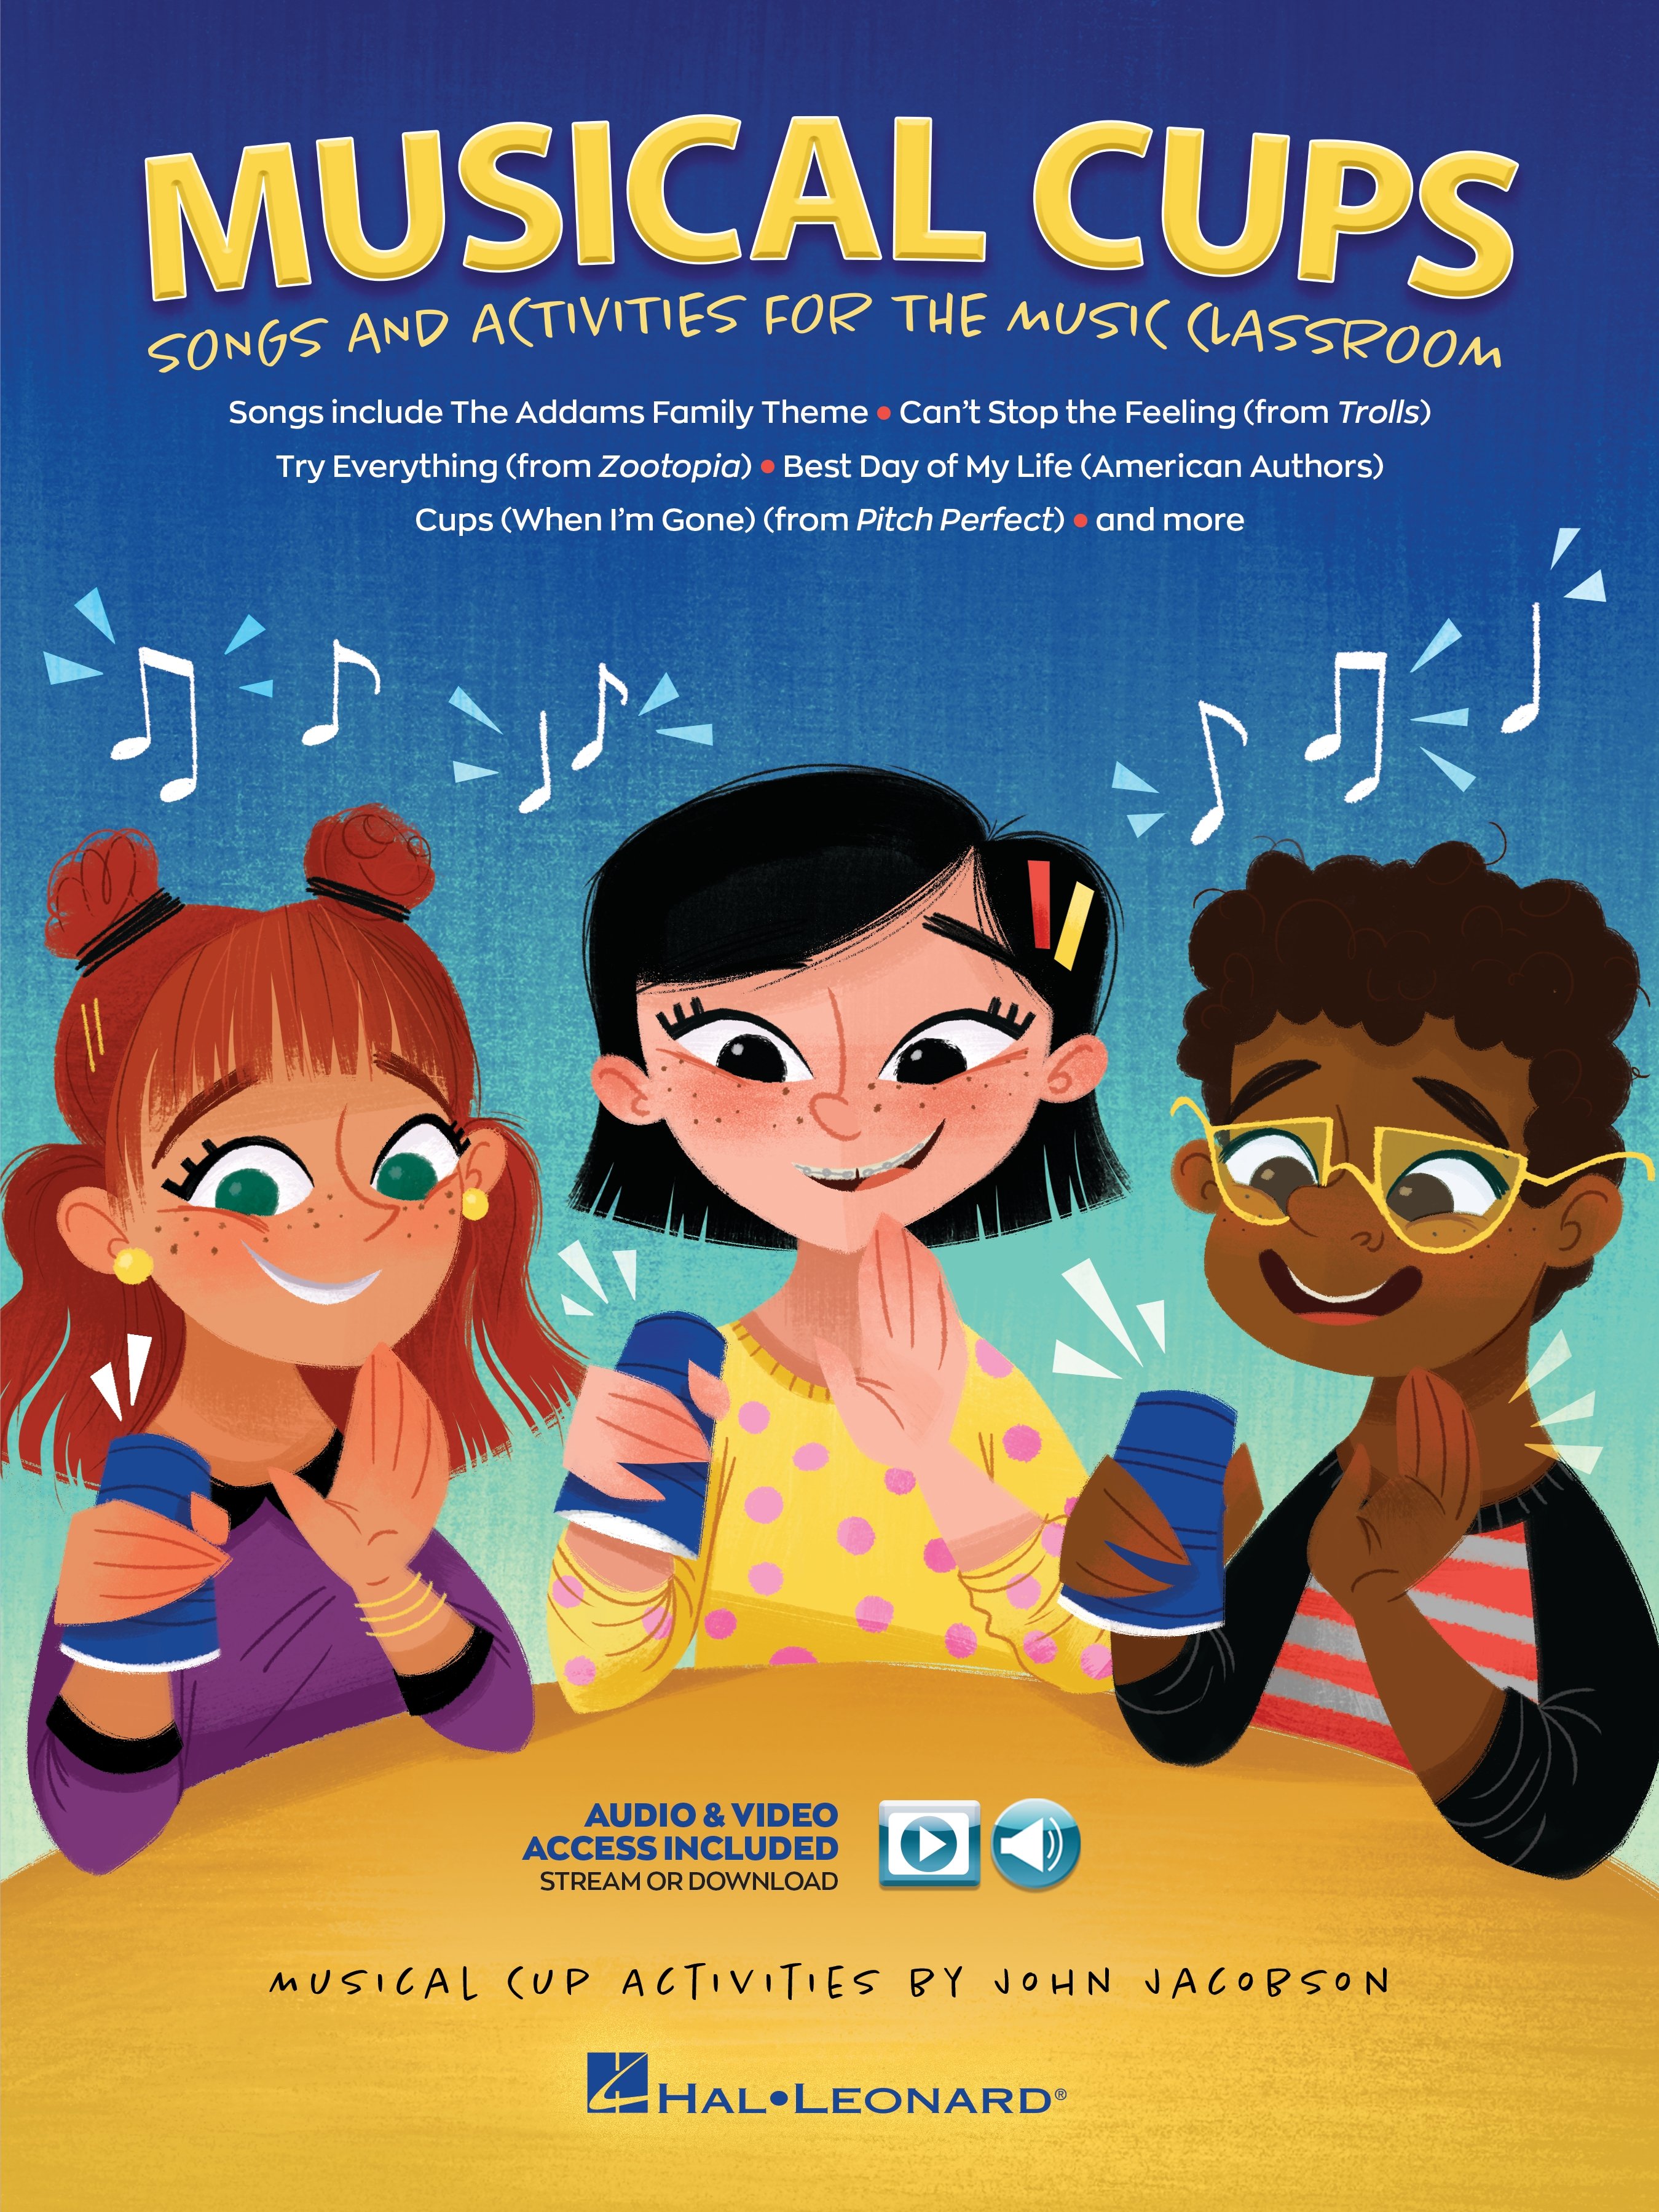 Rhythm Cups - Songs and Activities for the Music Classroom